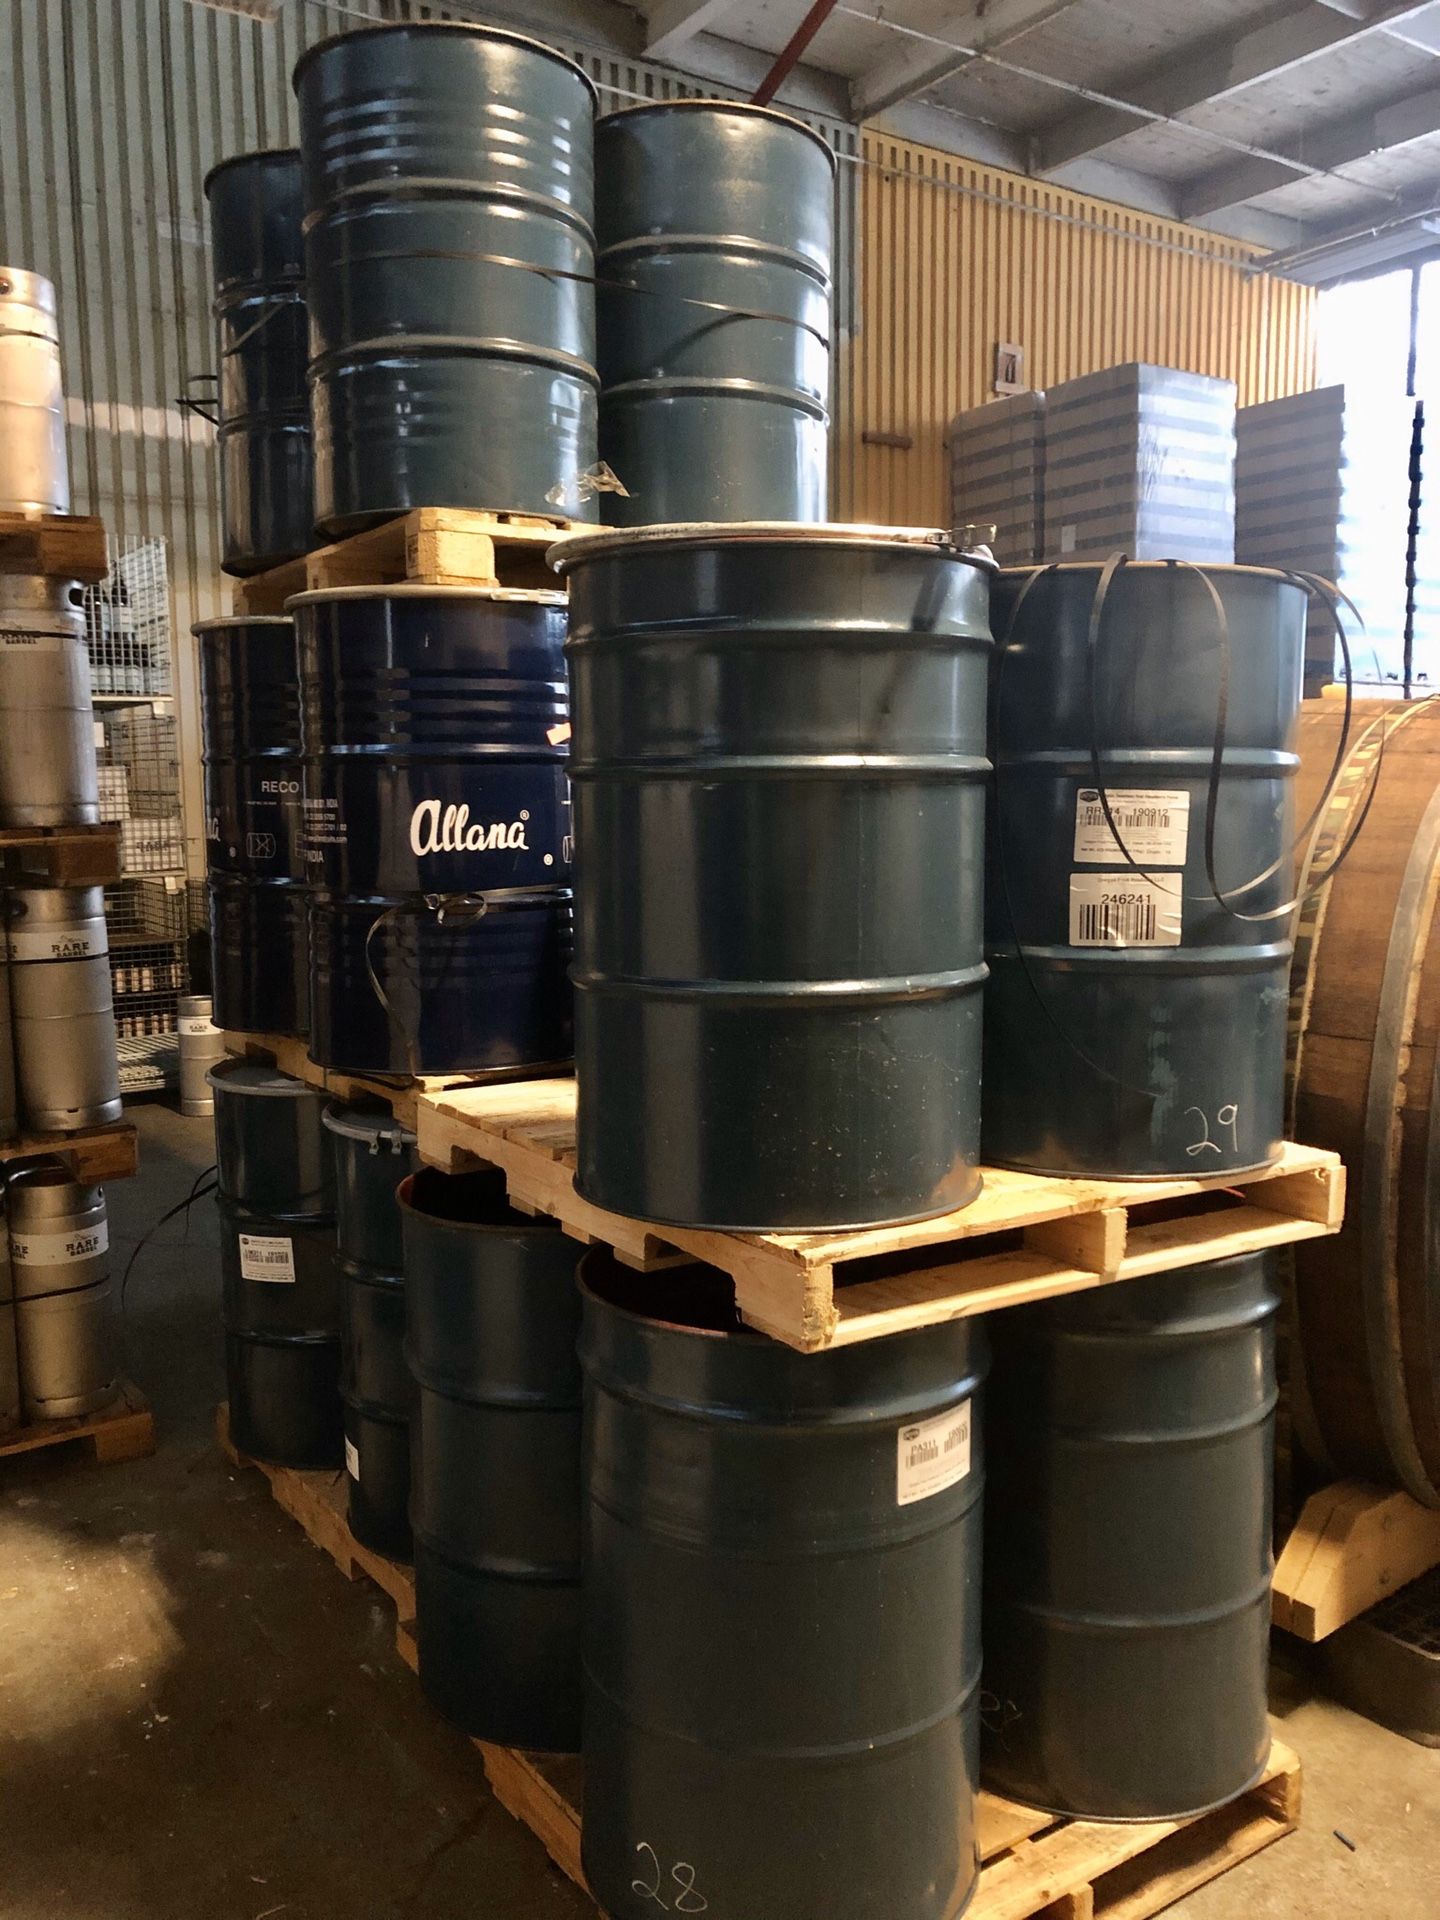 55 Gallon Drums - Check my other offers